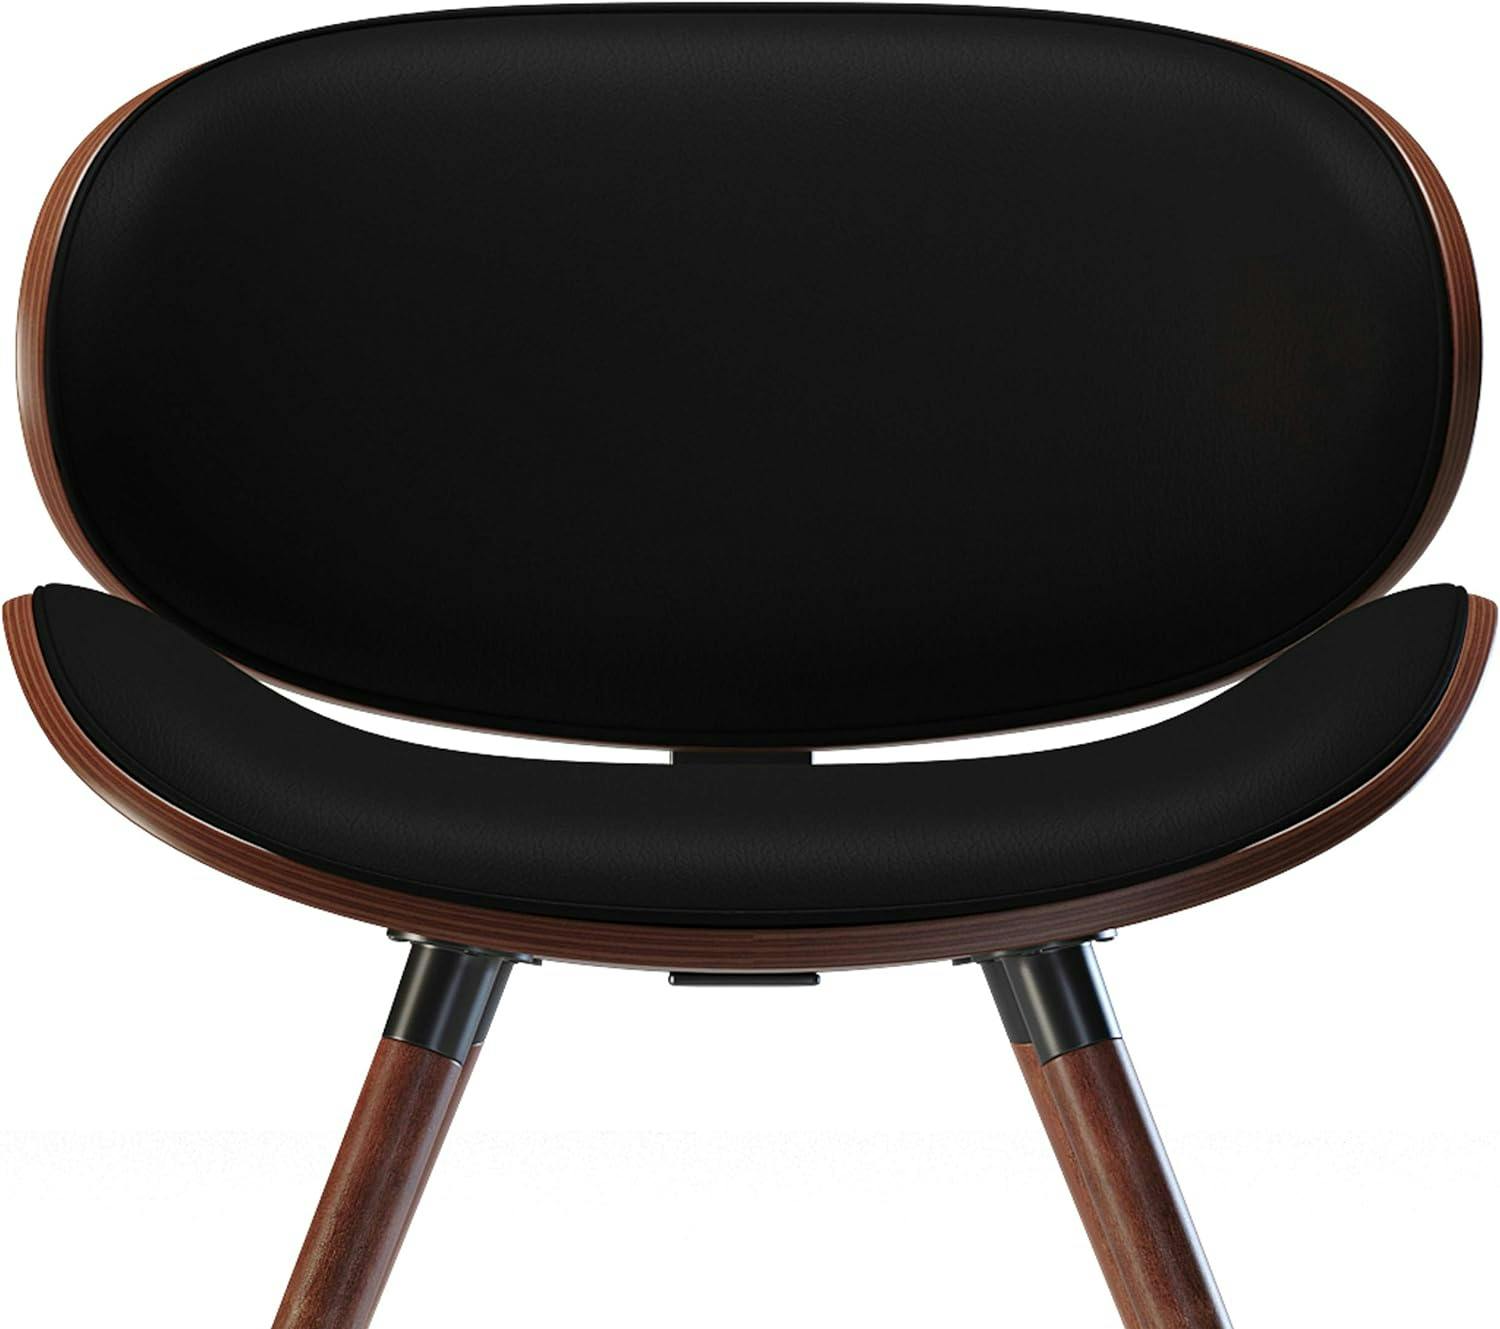 Marana Curved Black Faux Leather and Wood Mid-Century Side Chair